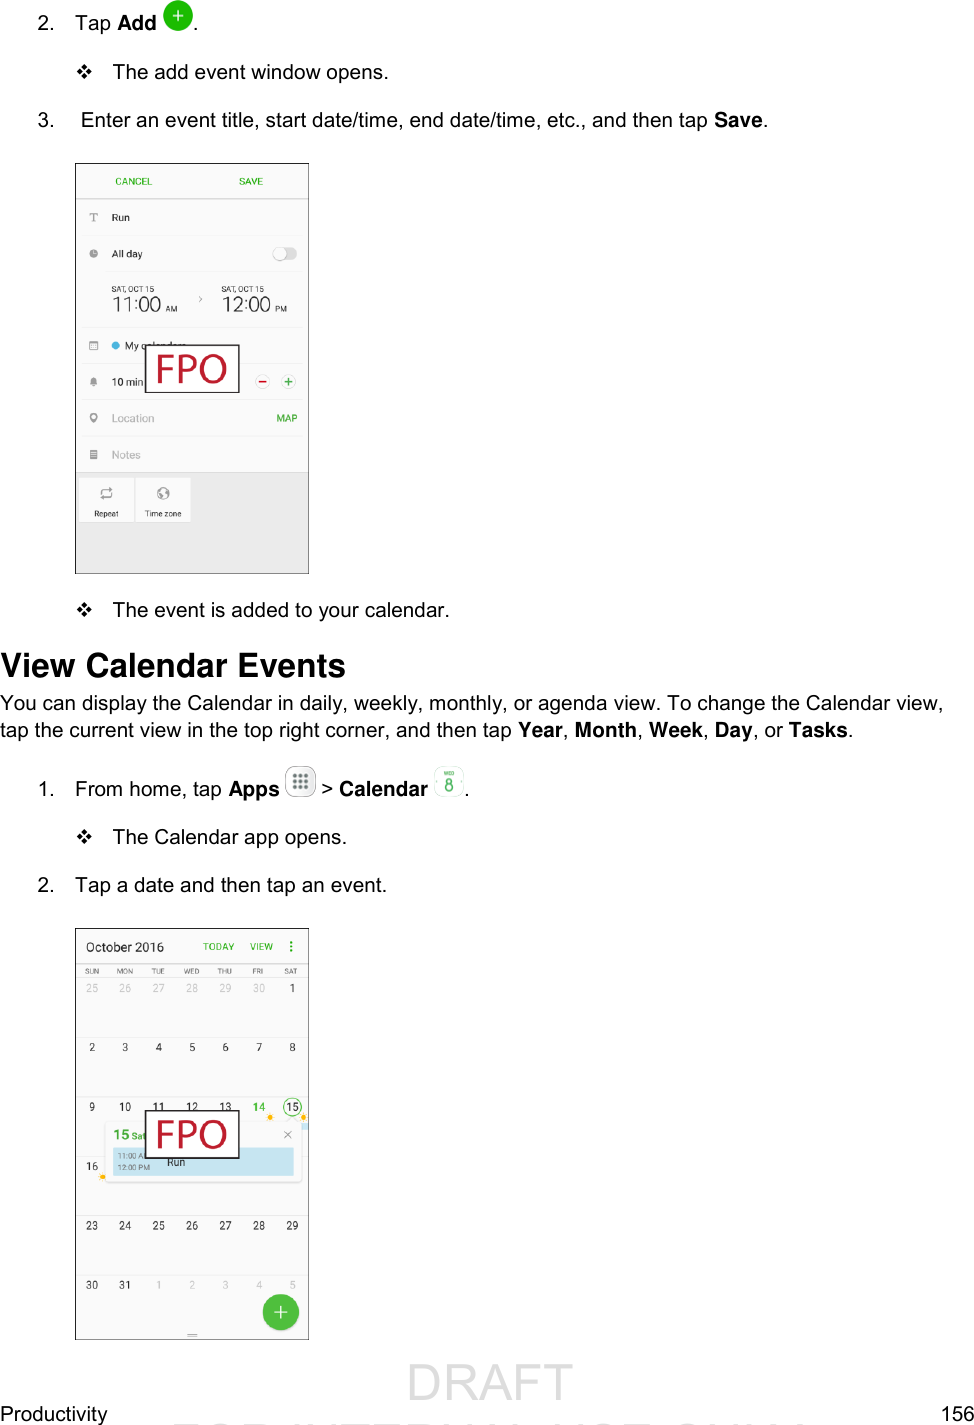                  DRAFT FOR INTERNAL USE ONLYProductivity  156 2.  Tap Add  .    The add event window opens. 3.   Enter an event title, start date/time, end date/time, etc., and then tap Save.     The event is added to your calendar. View Calendar Events You can display the Calendar in daily, weekly, monthly, or agenda view. To change the Calendar view, tap the current view in the top right corner, and then tap Year, Month, Week, Day, or Tasks. 1.  From home, tap Apps   &gt; Calendar .    The Calendar app opens. 2.  Tap a date and then tap an event.   